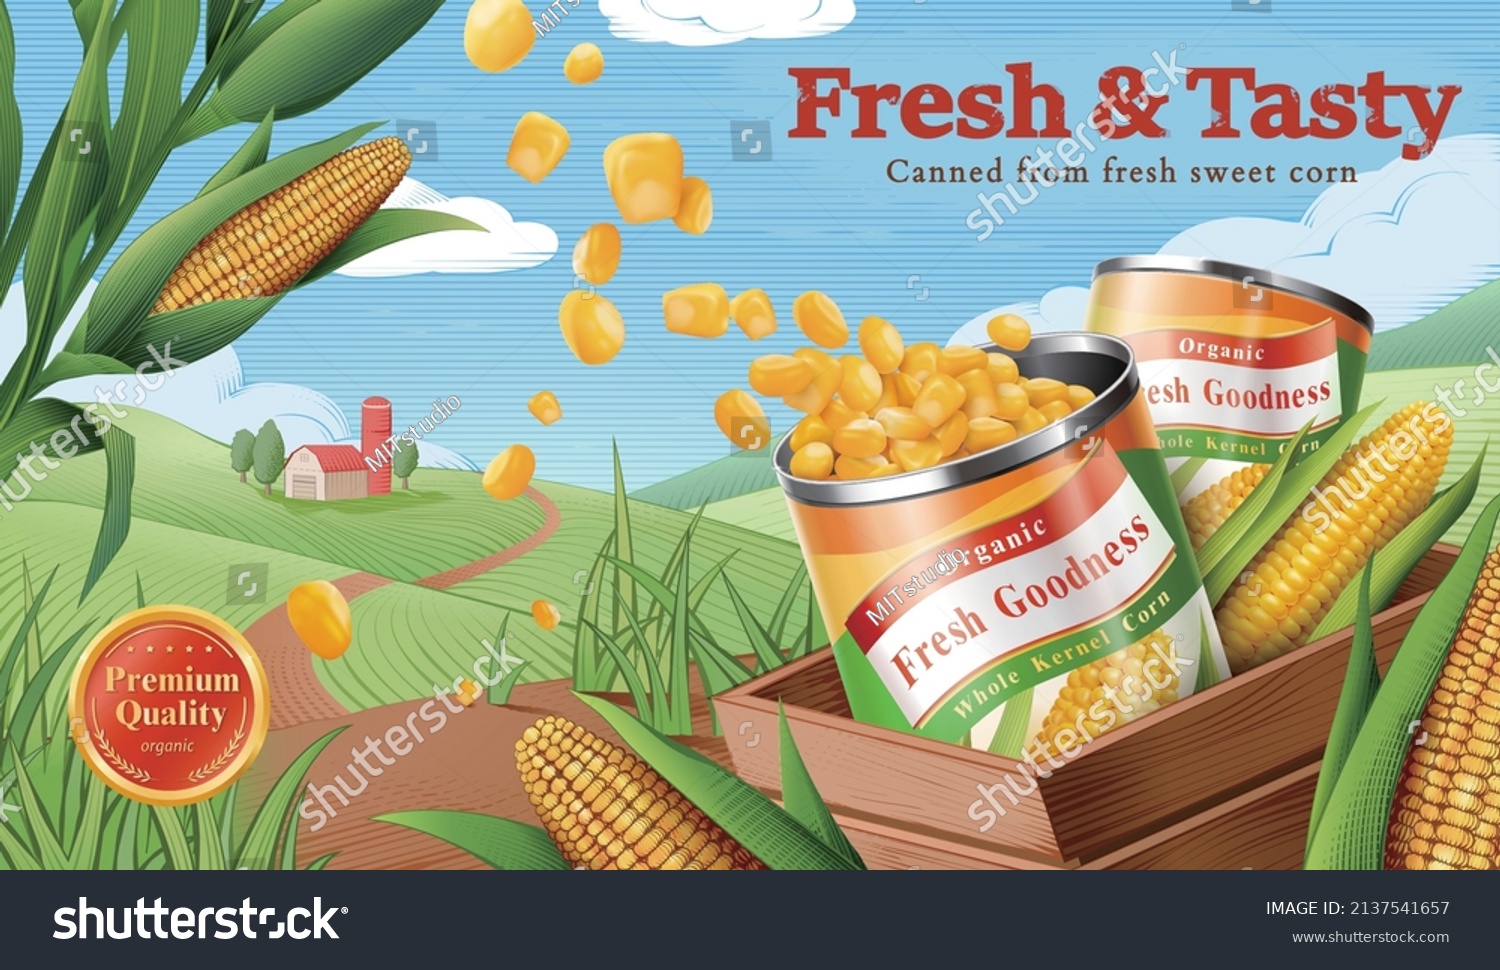 Organic canned sweet corn ad template. 3d fresh and tasty corn can with engraving green farm landscape drawing. #2137541657